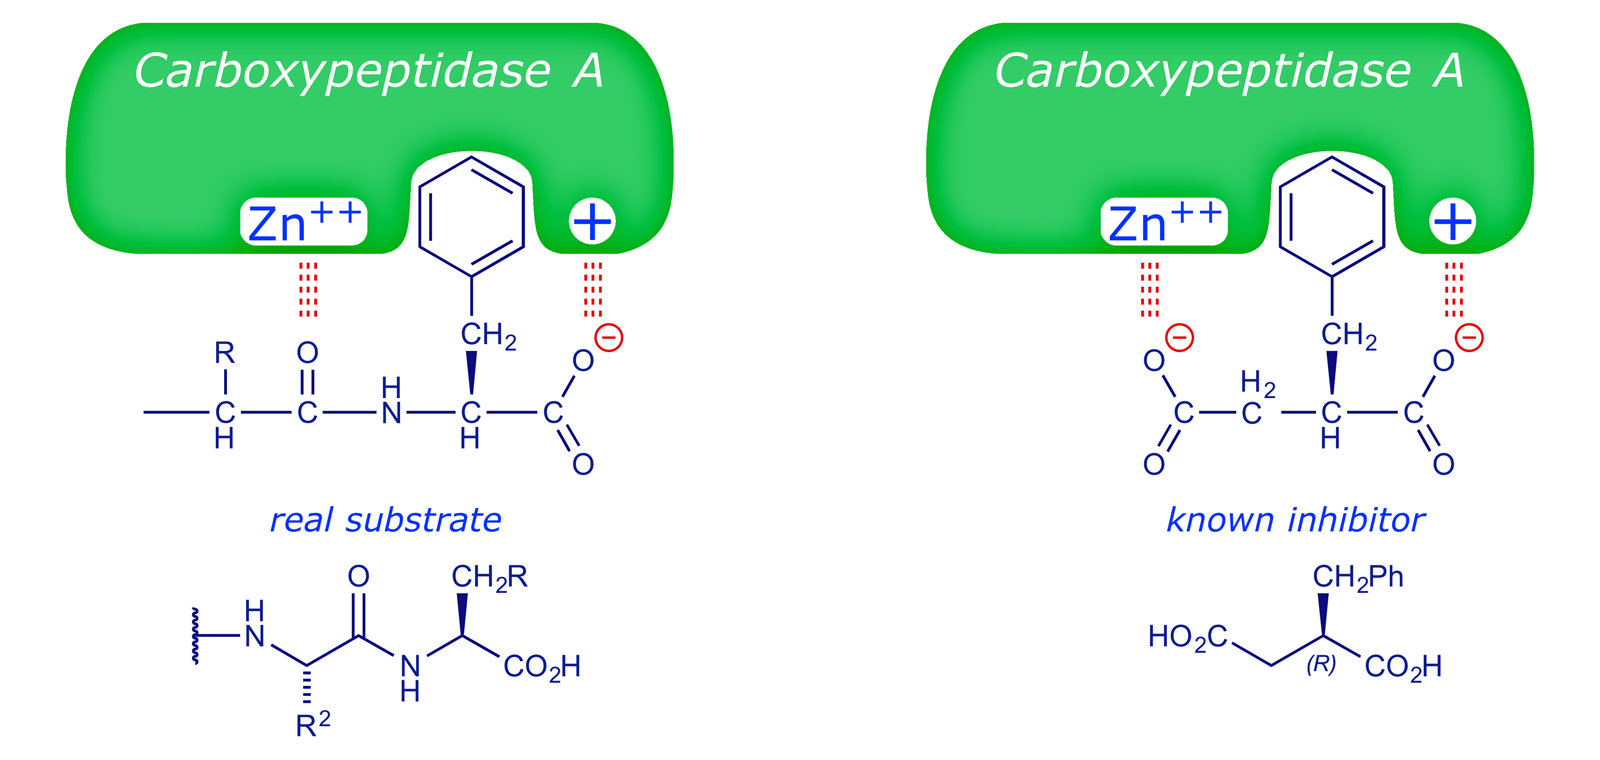 Rationale for mode of action of carboxypeptidase A